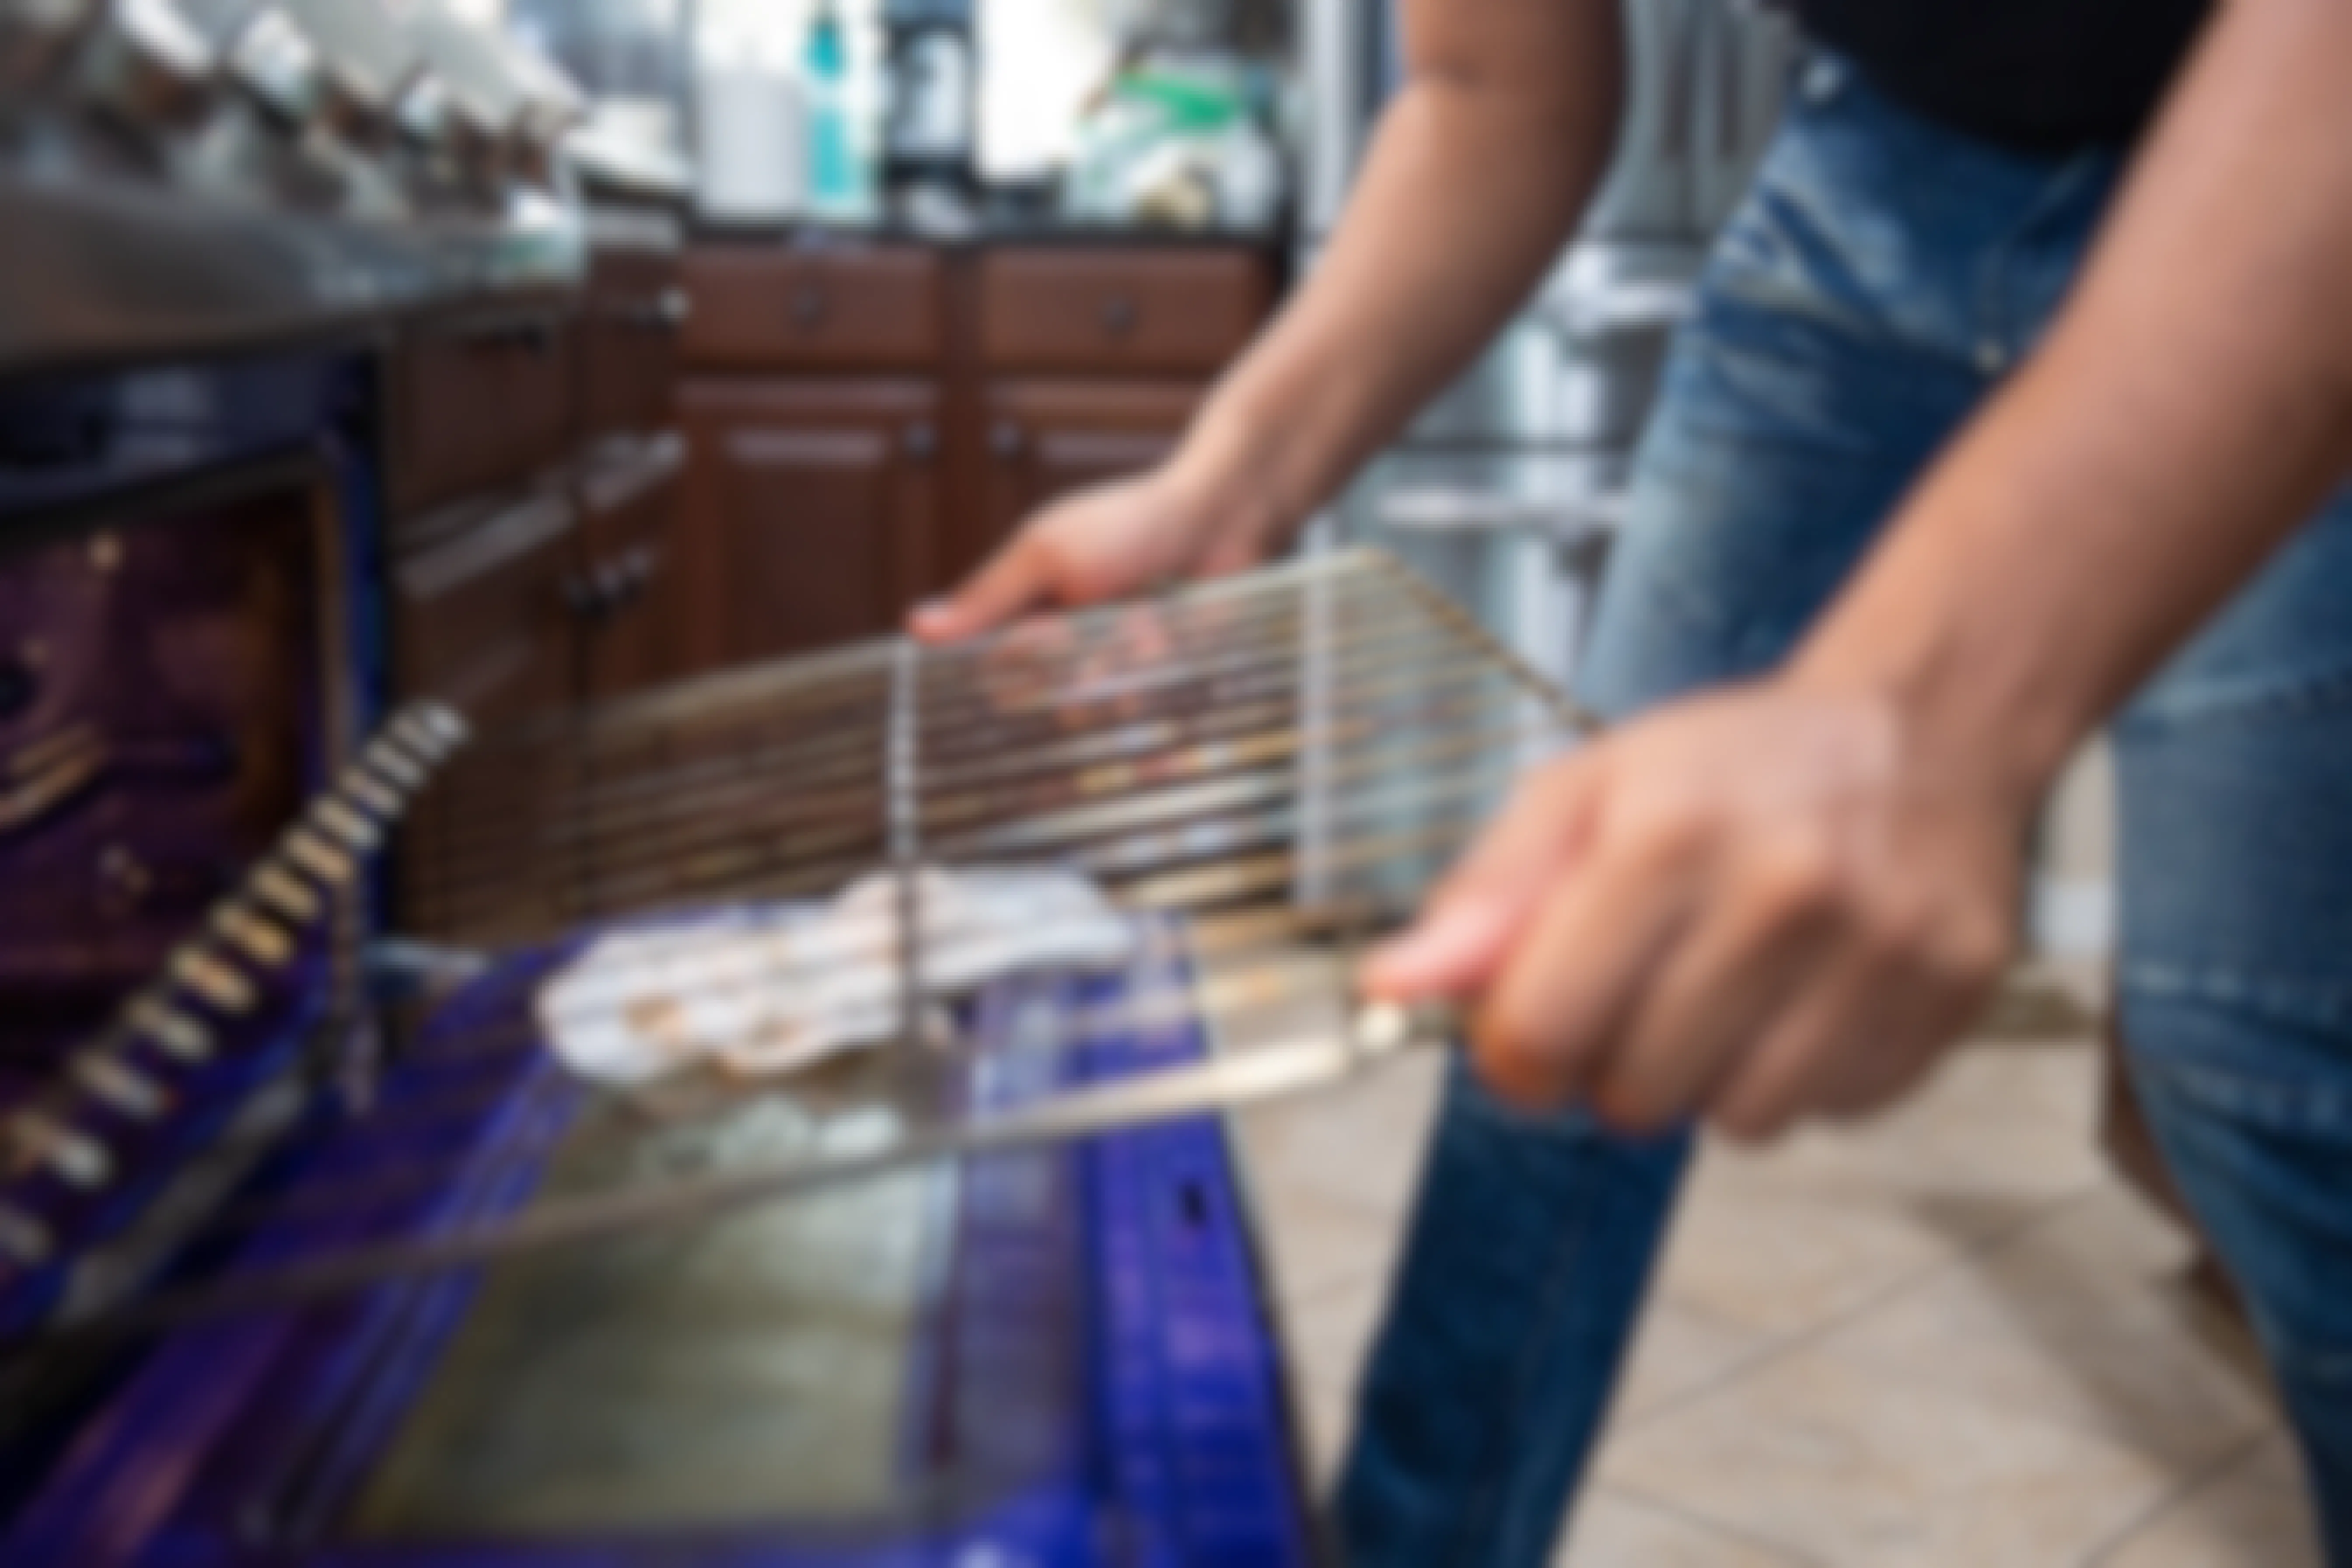 12 Oven Cleaning Hacks That Make the Job Super Easy